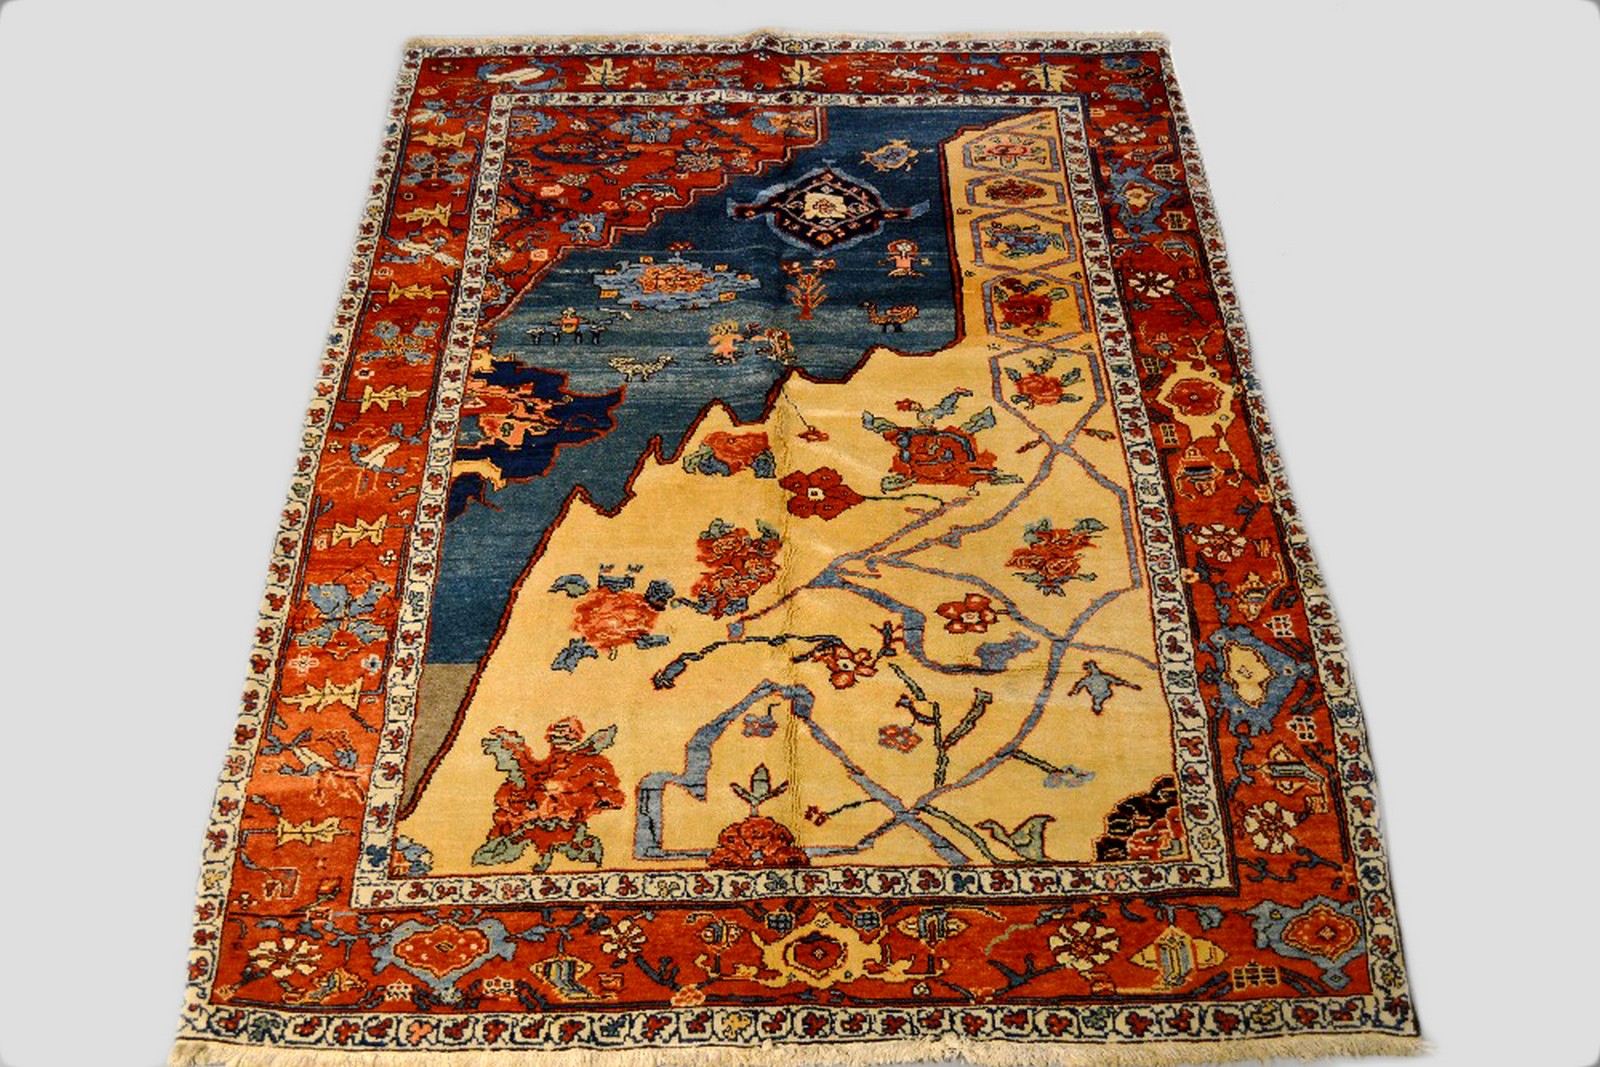 Most attractive Anatolian wagireh, modern, 8ft. 3in. x 6ft. 5in. 2.51m. x 1.96m. Note the animals,